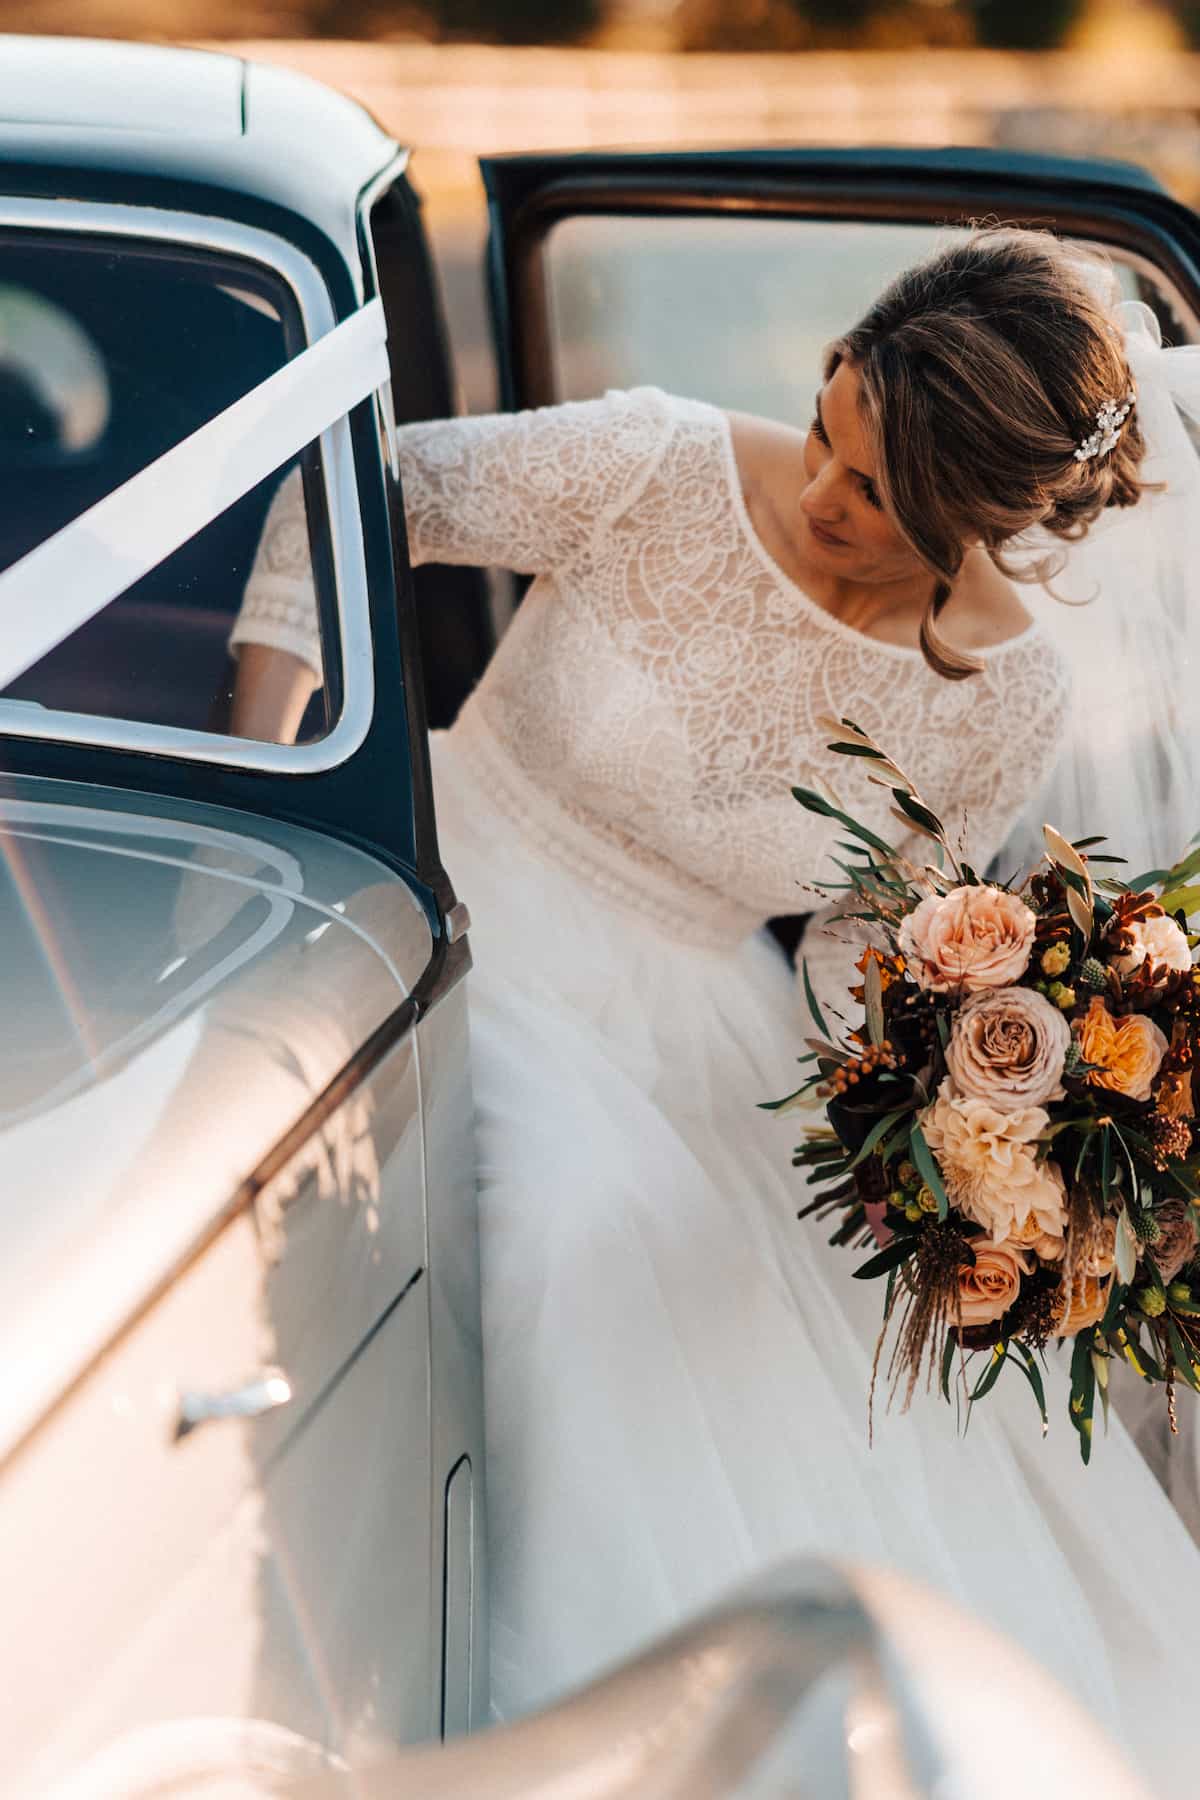 A bride getting out of a car carrying a pale pink bouquet